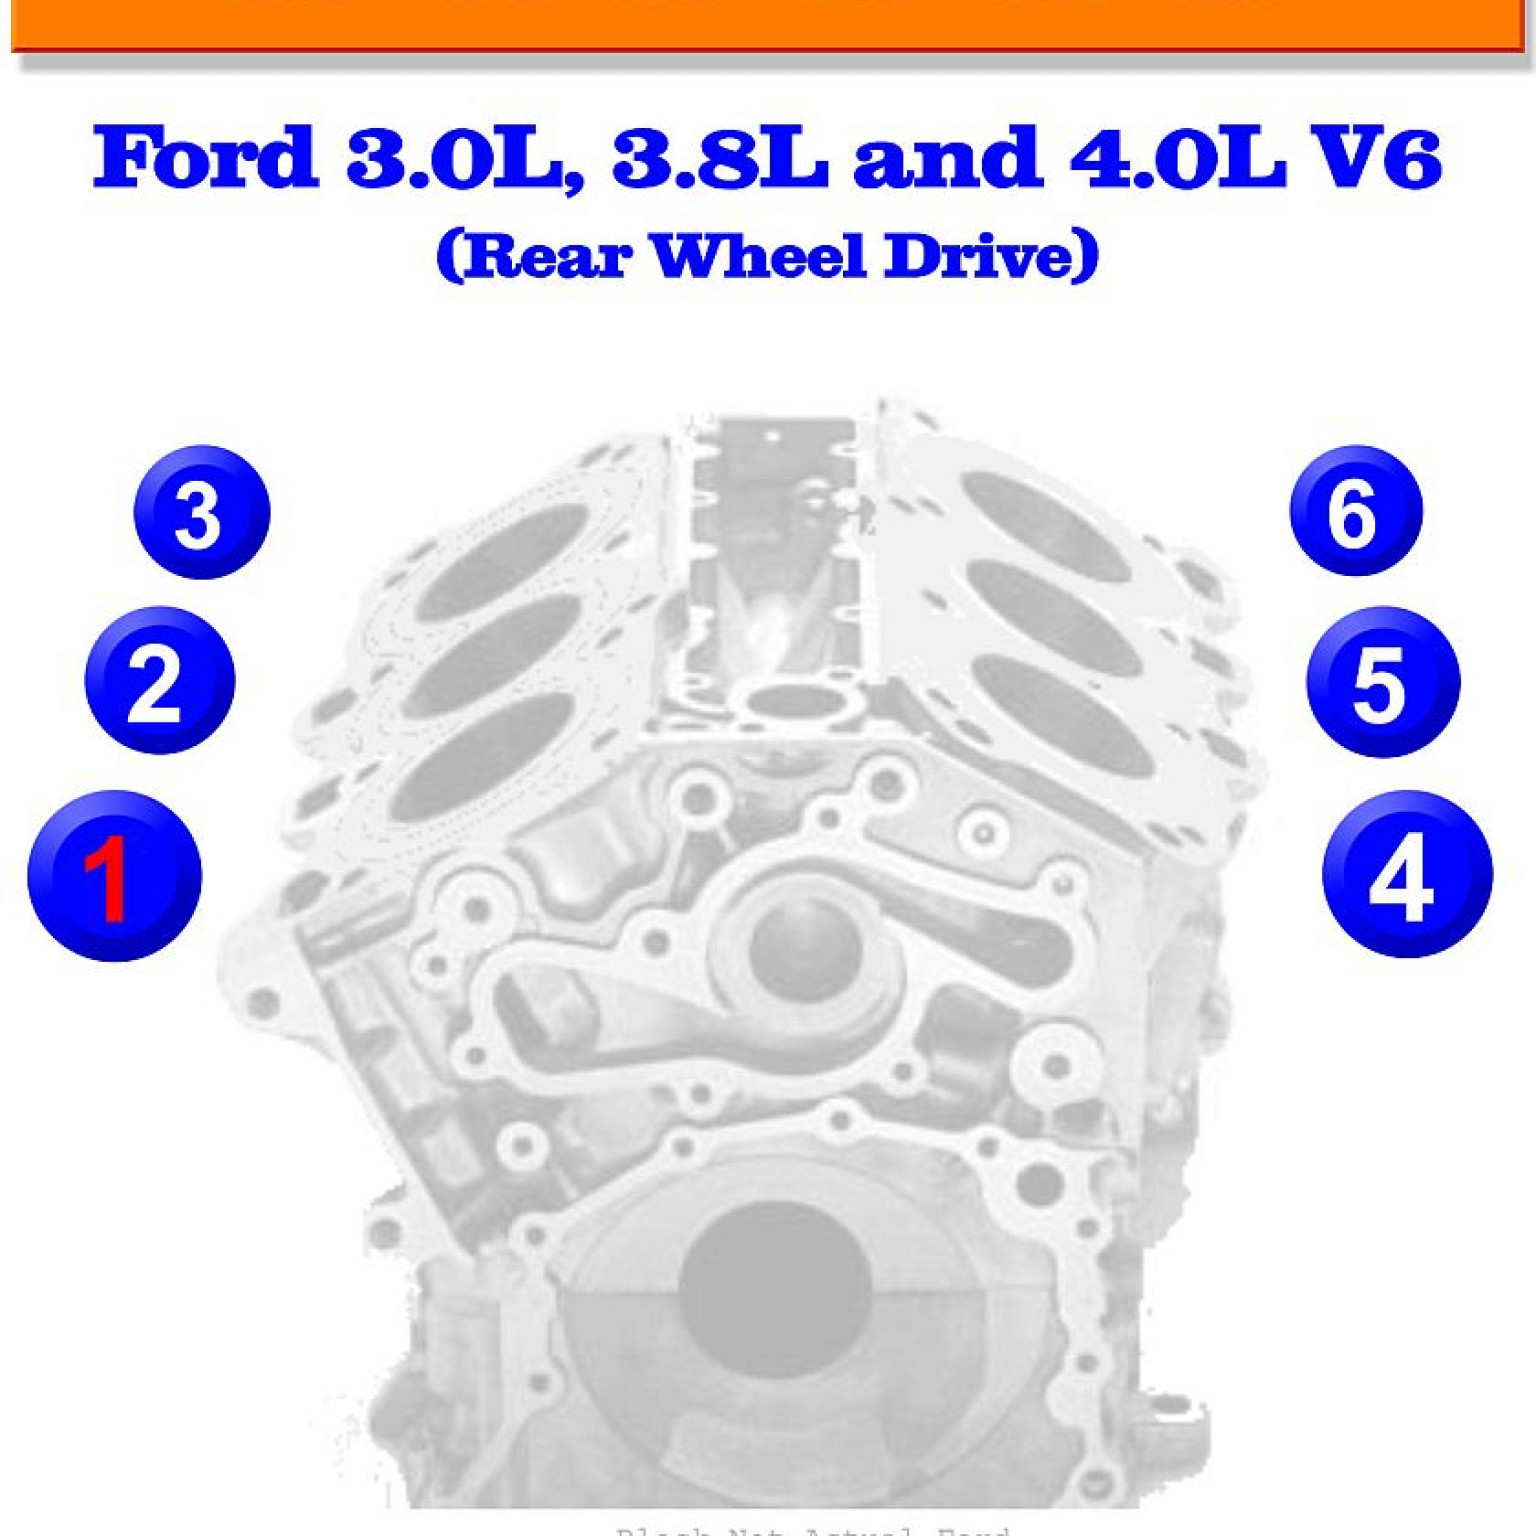 2002 Ford Mustang 3.8 V6 Firing Order | Wiring and Printable